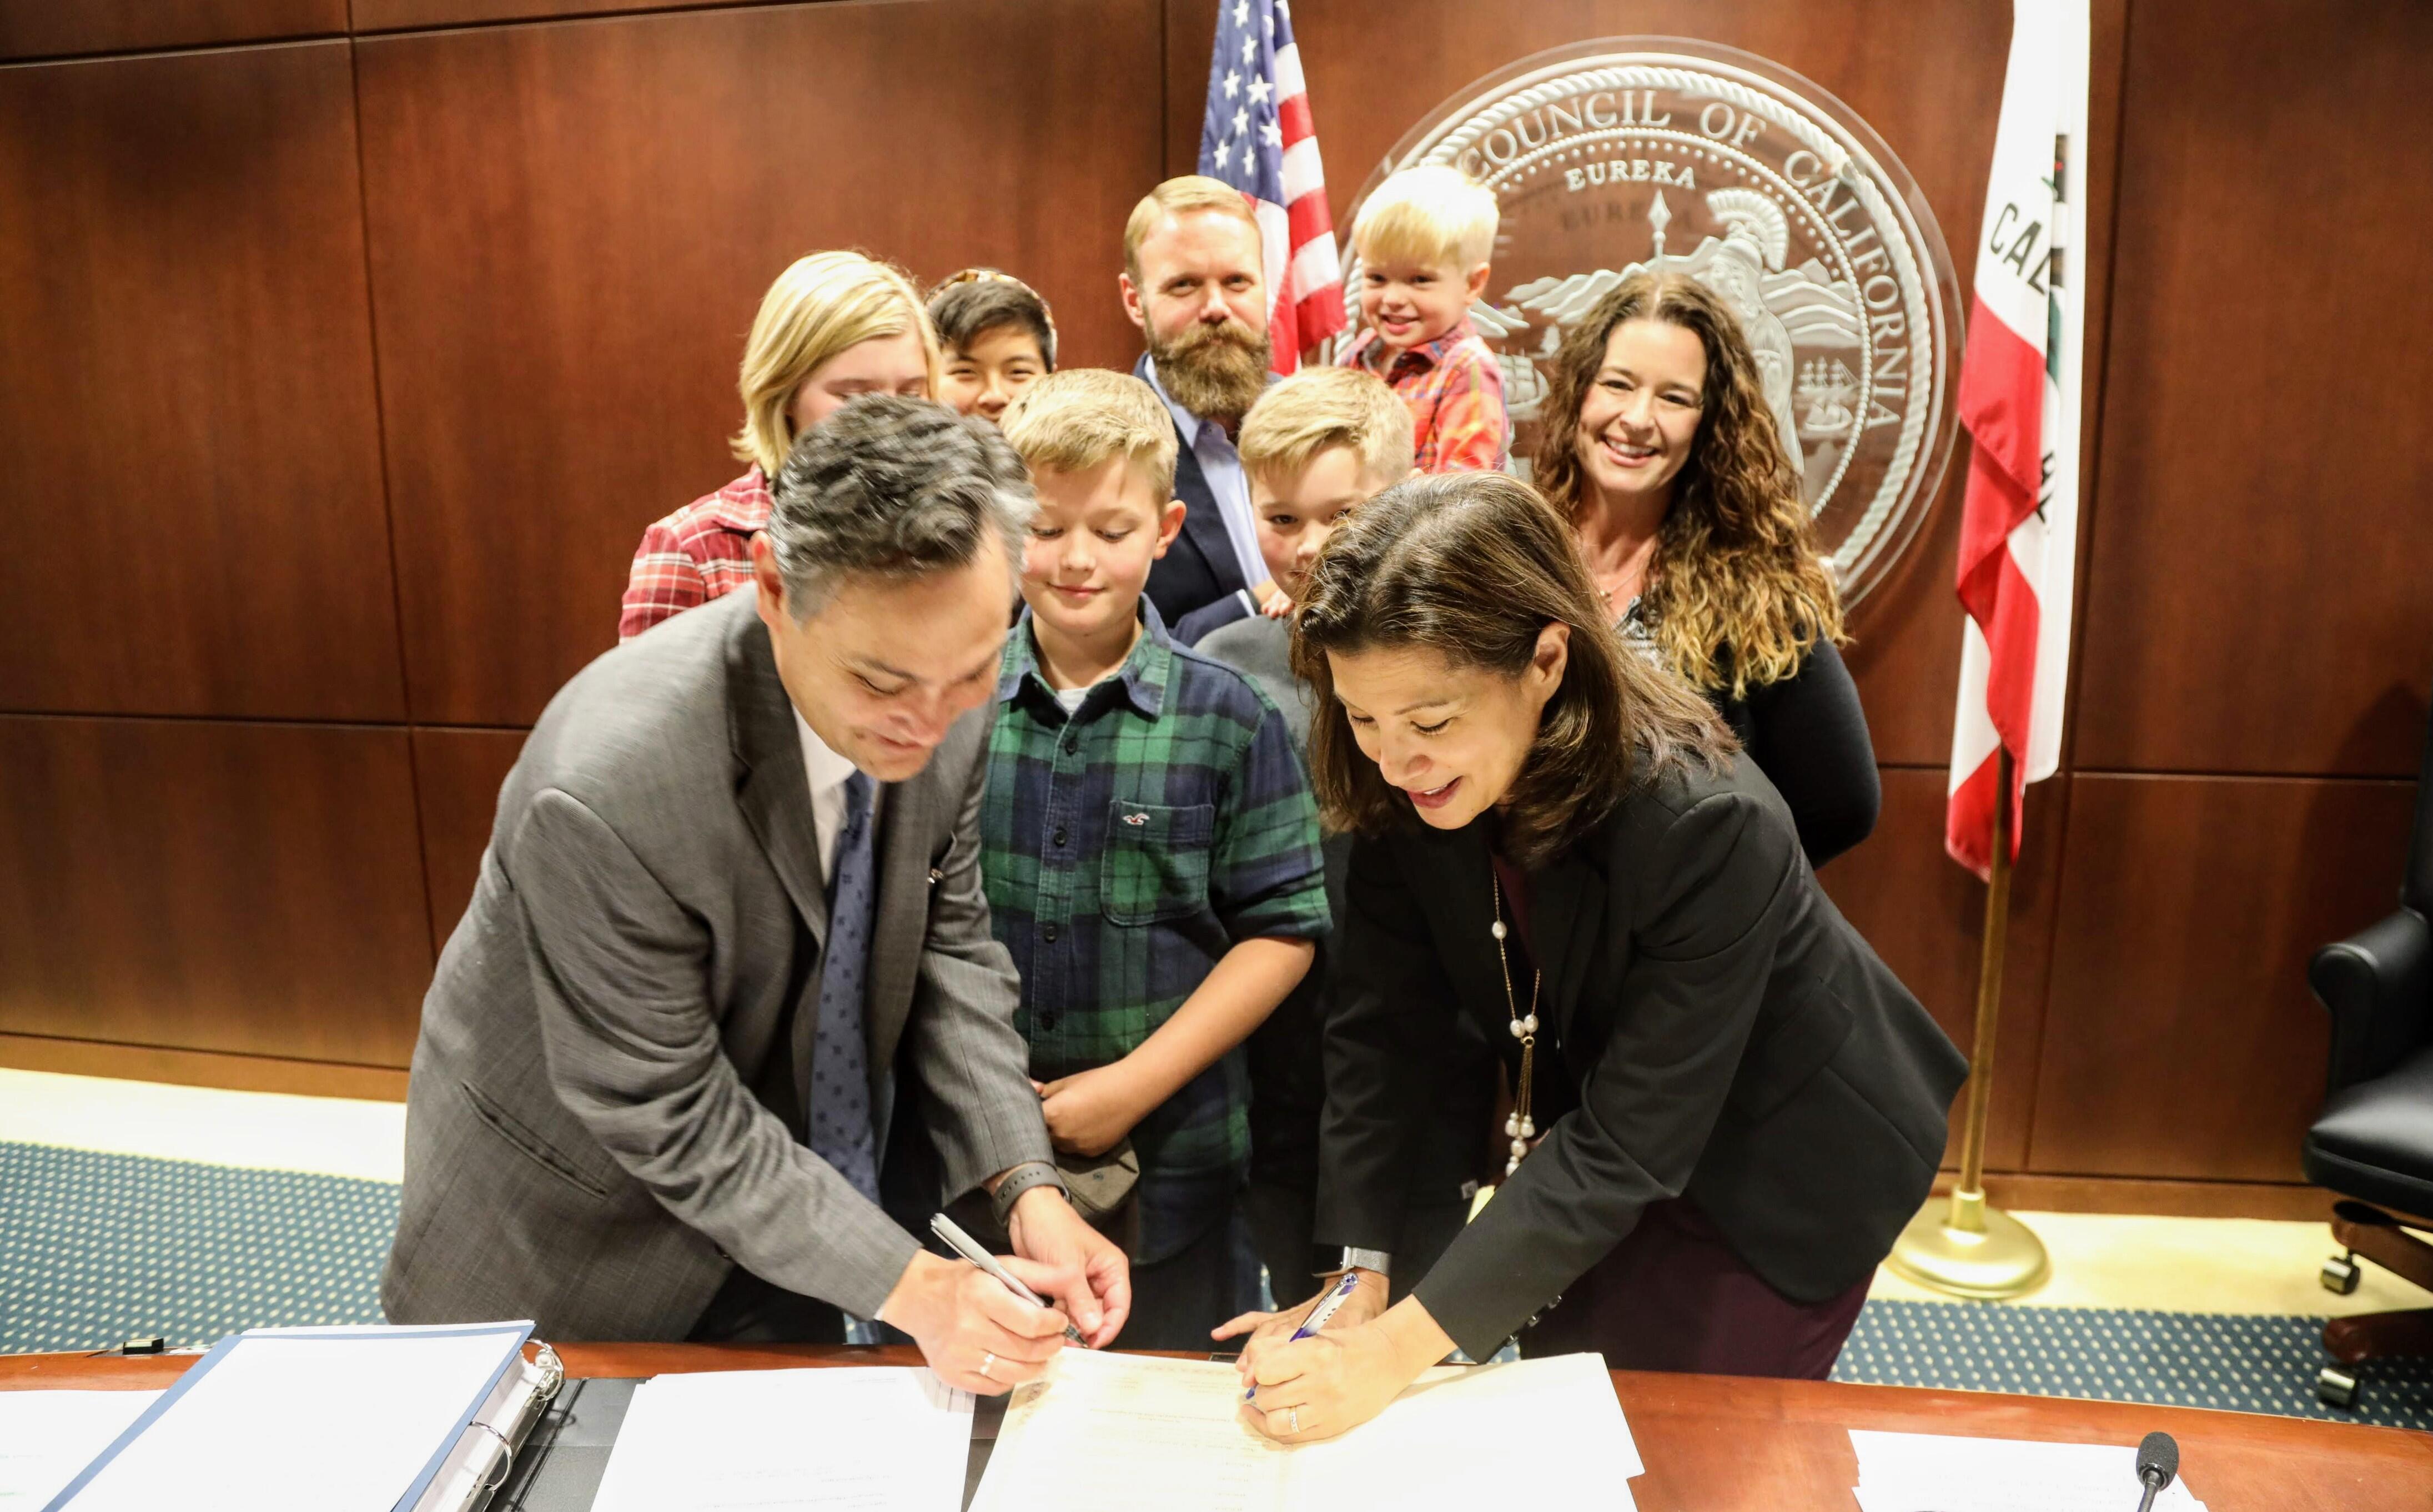 Chief Justice Tani Cantil-Sakauye and Administrative Director Martin Hoshino sign the resolution proclaiming November "Court Adoption and Permanency Month."